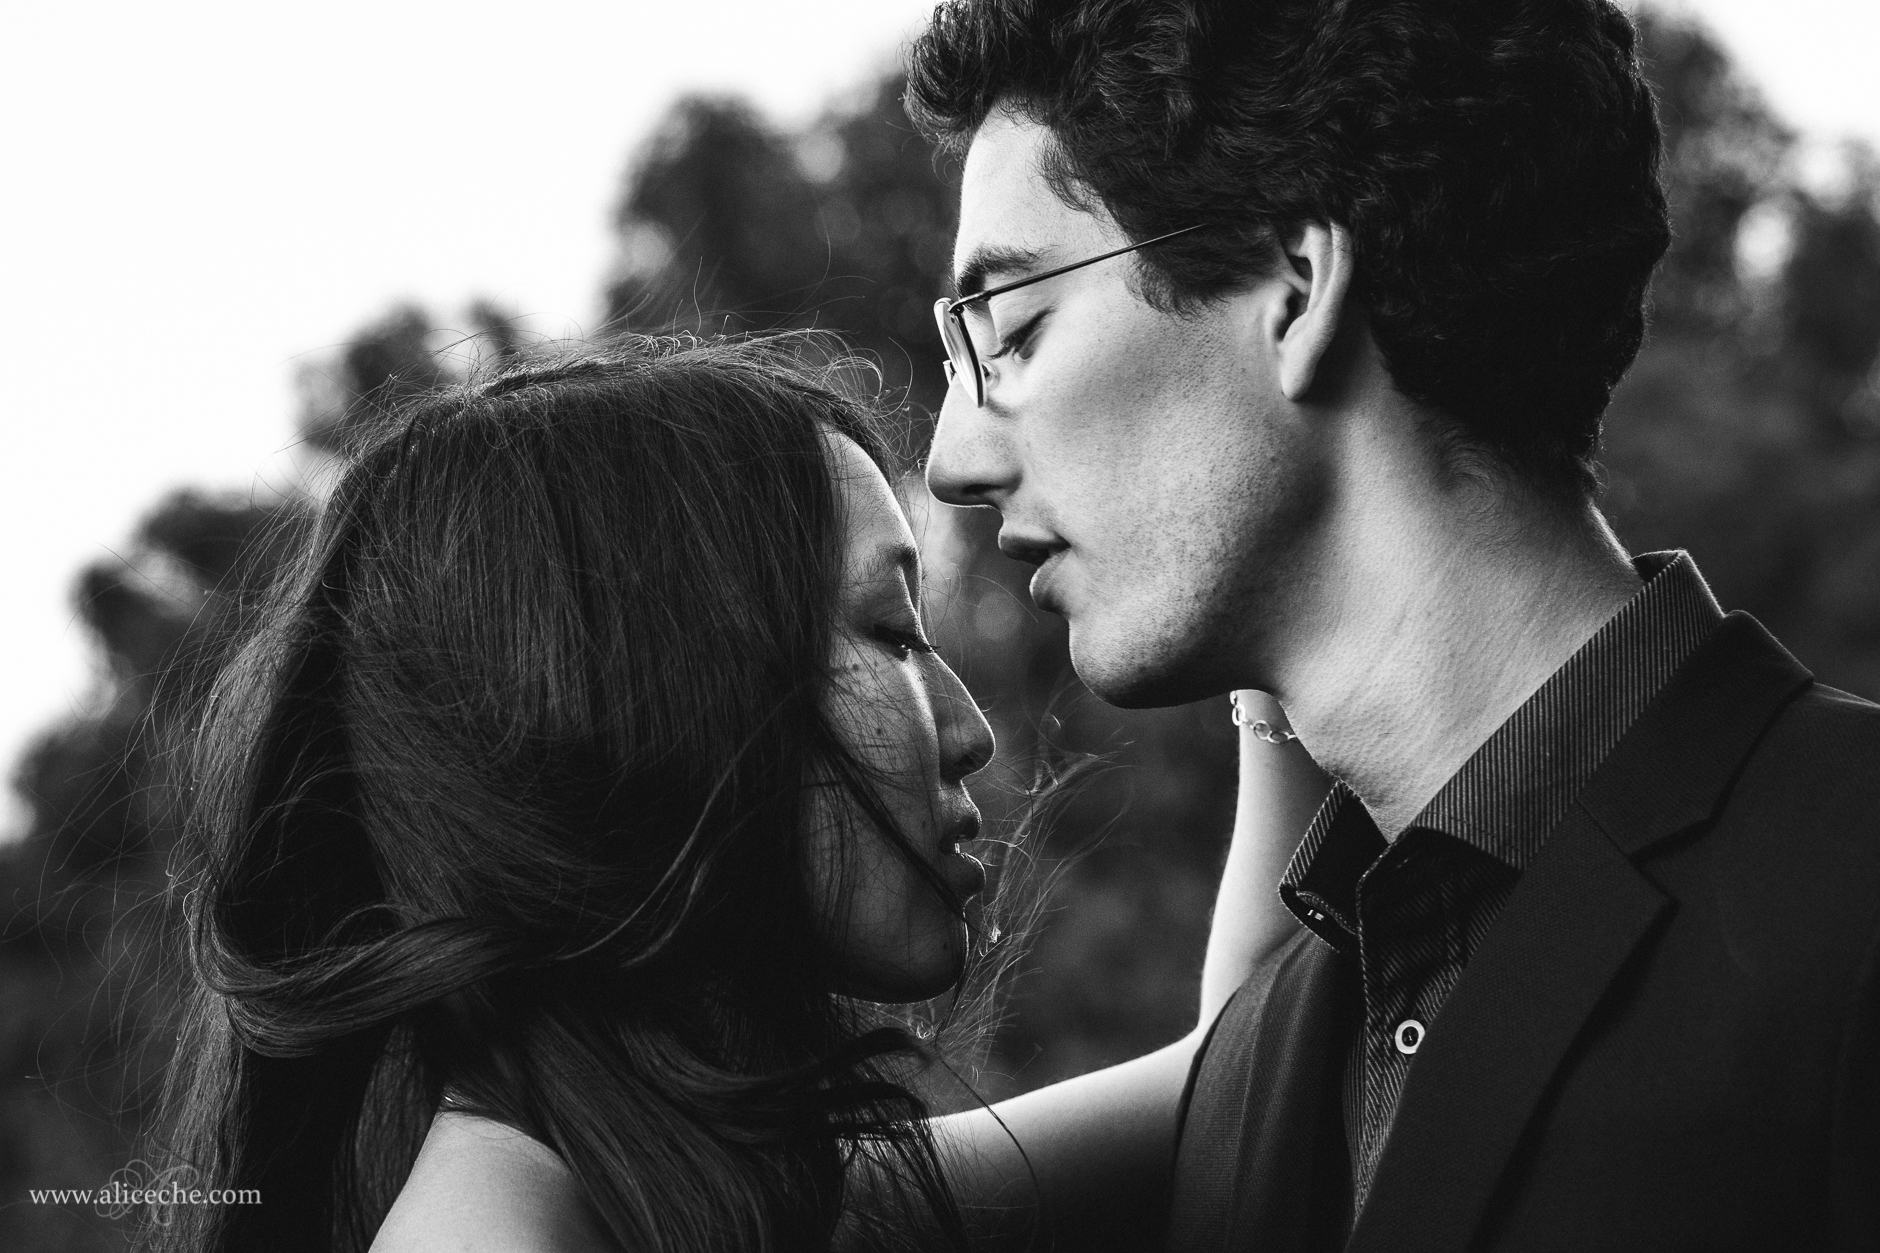 alice-che-photography-self-portrait-emotional-couple-black-and-white-wind